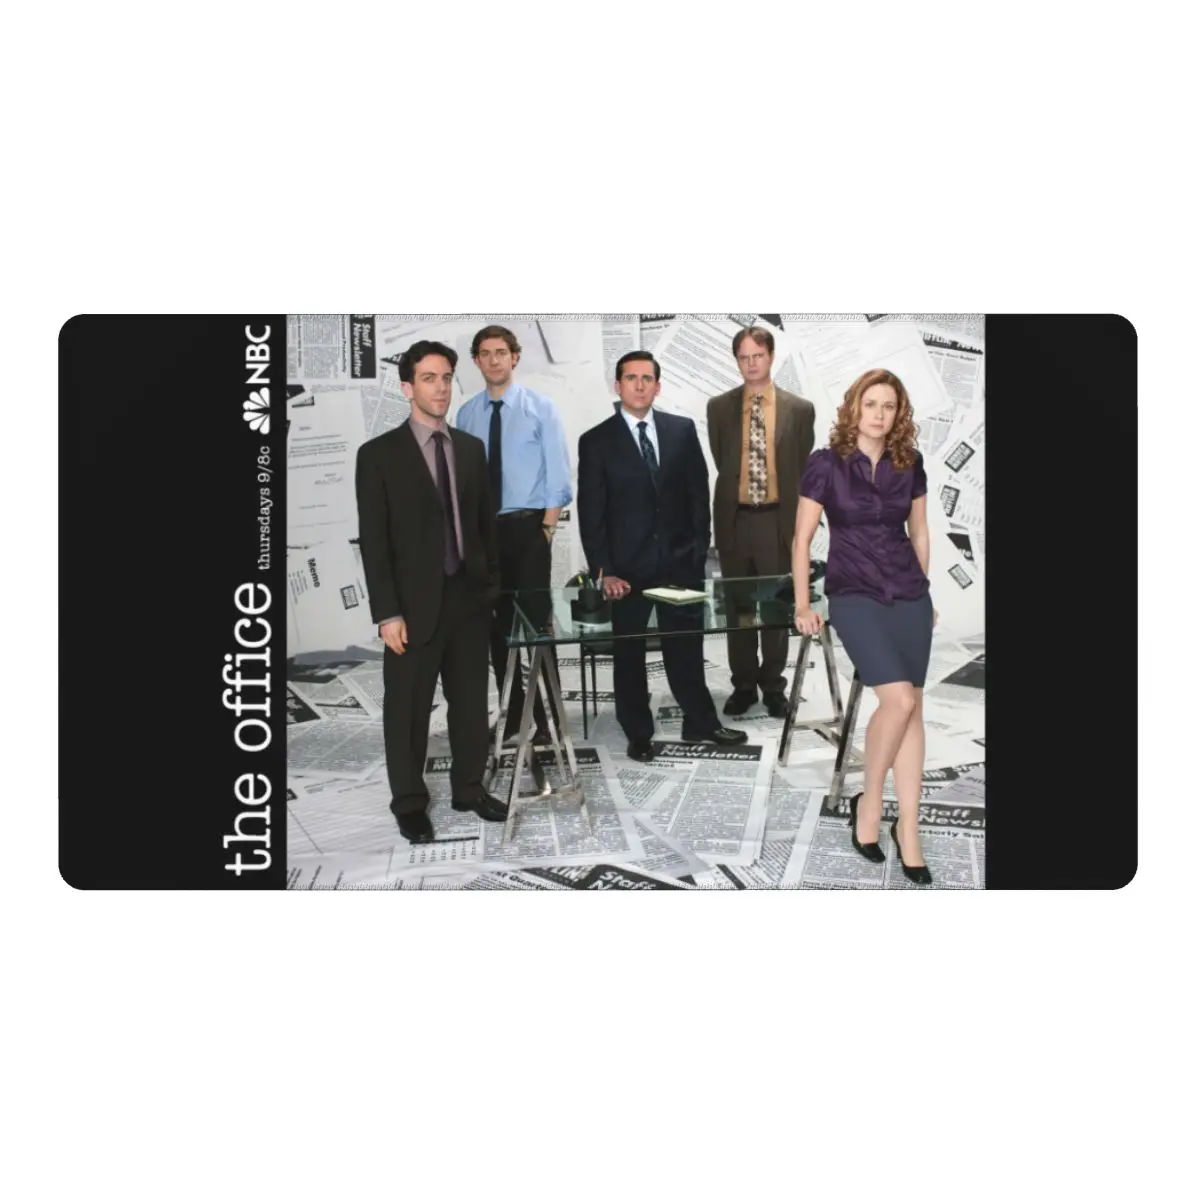 

The Office Dwight Schrute Gaming Mouse Pad Keyboard Mouse Mat Funny Tv 80x30 Fabric Mousepad for Gamers